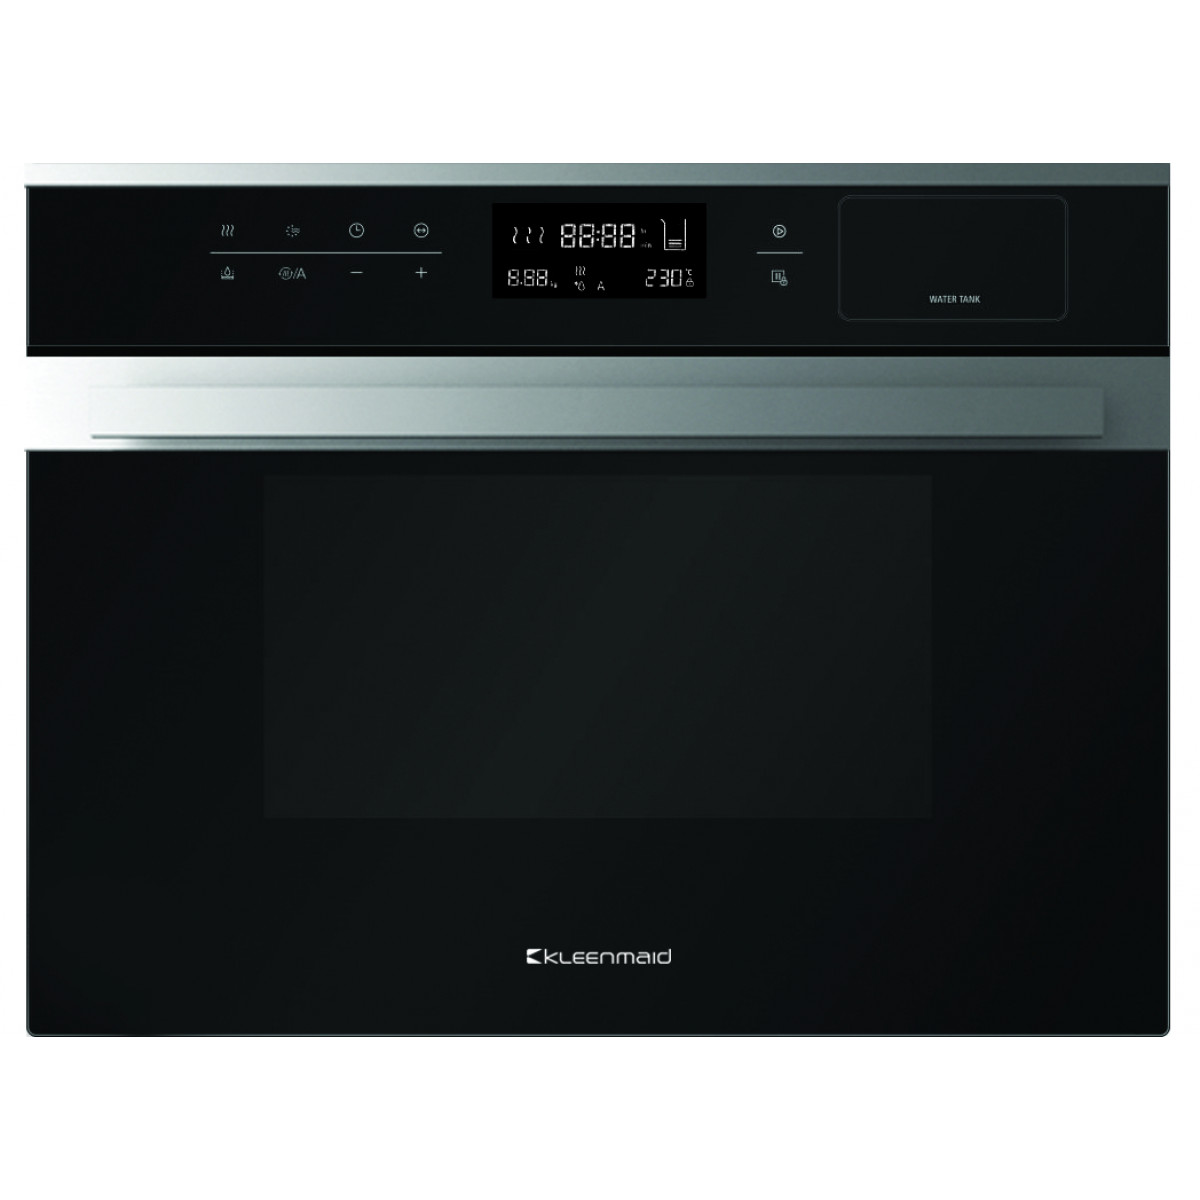 Kleenmaid SMC4530 35 Litre Steam Microwave Convection Oven